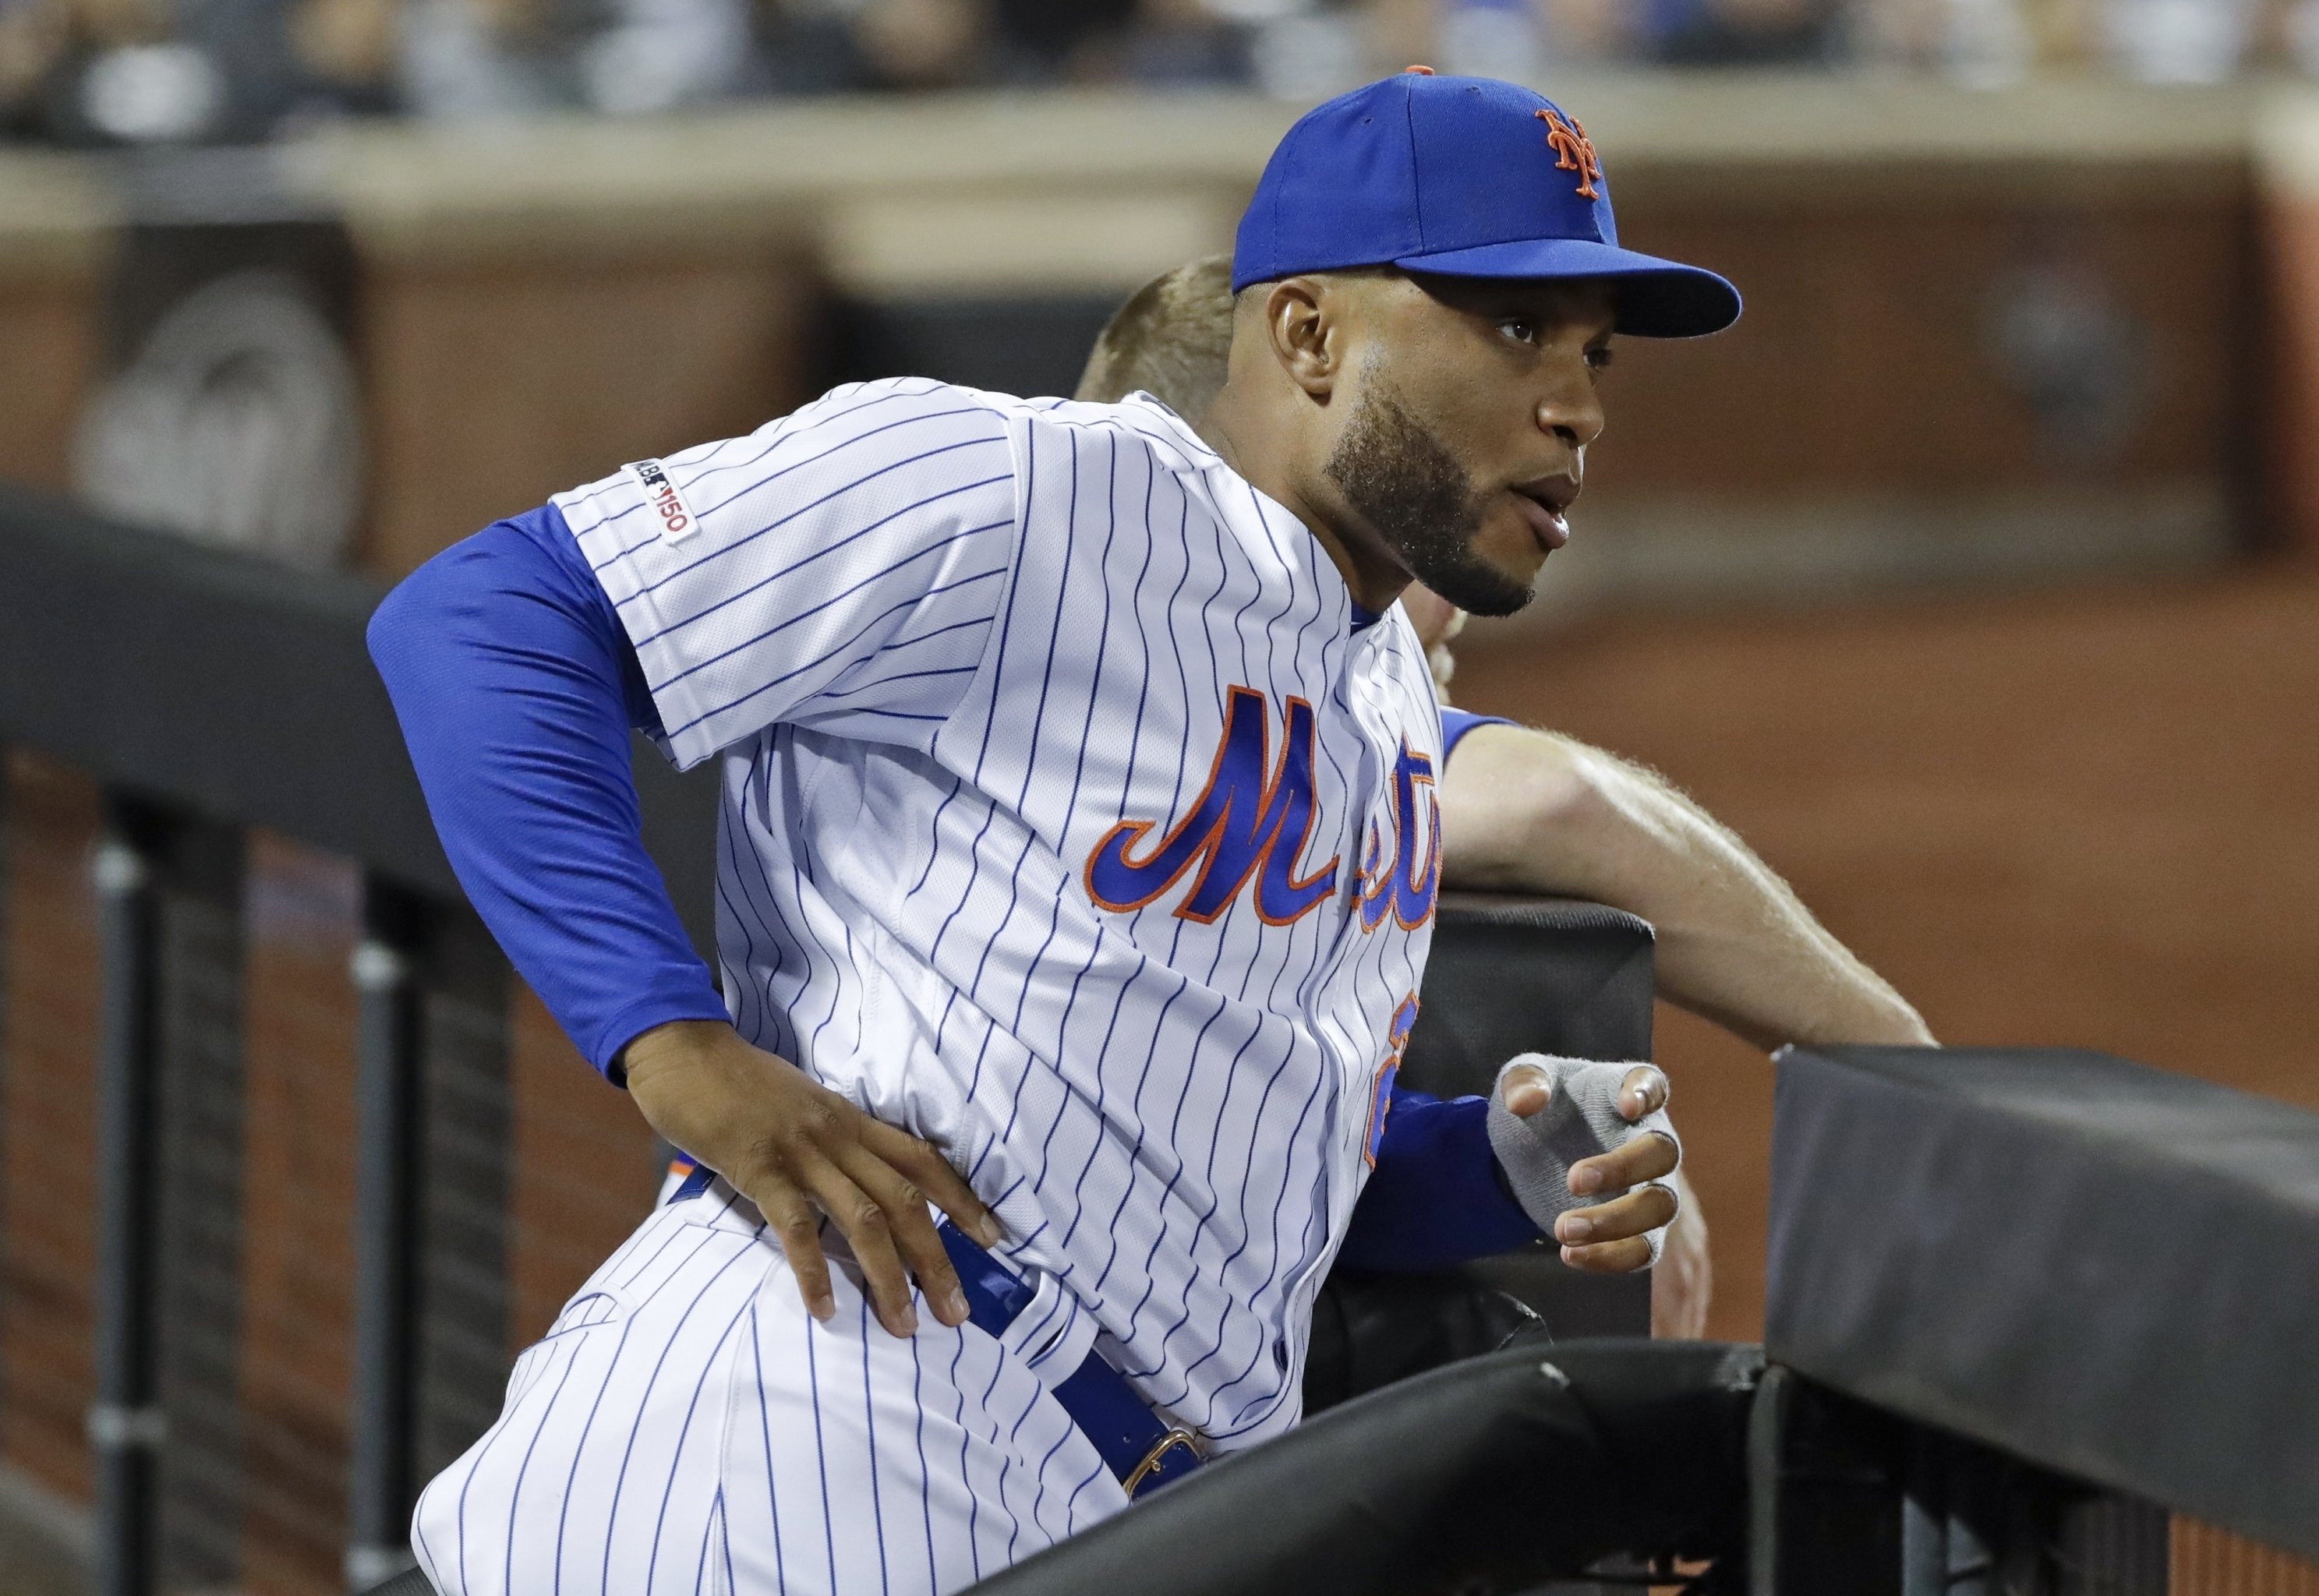 Yoenis Cespedes says he's 'not Superman' after Mets get swept by